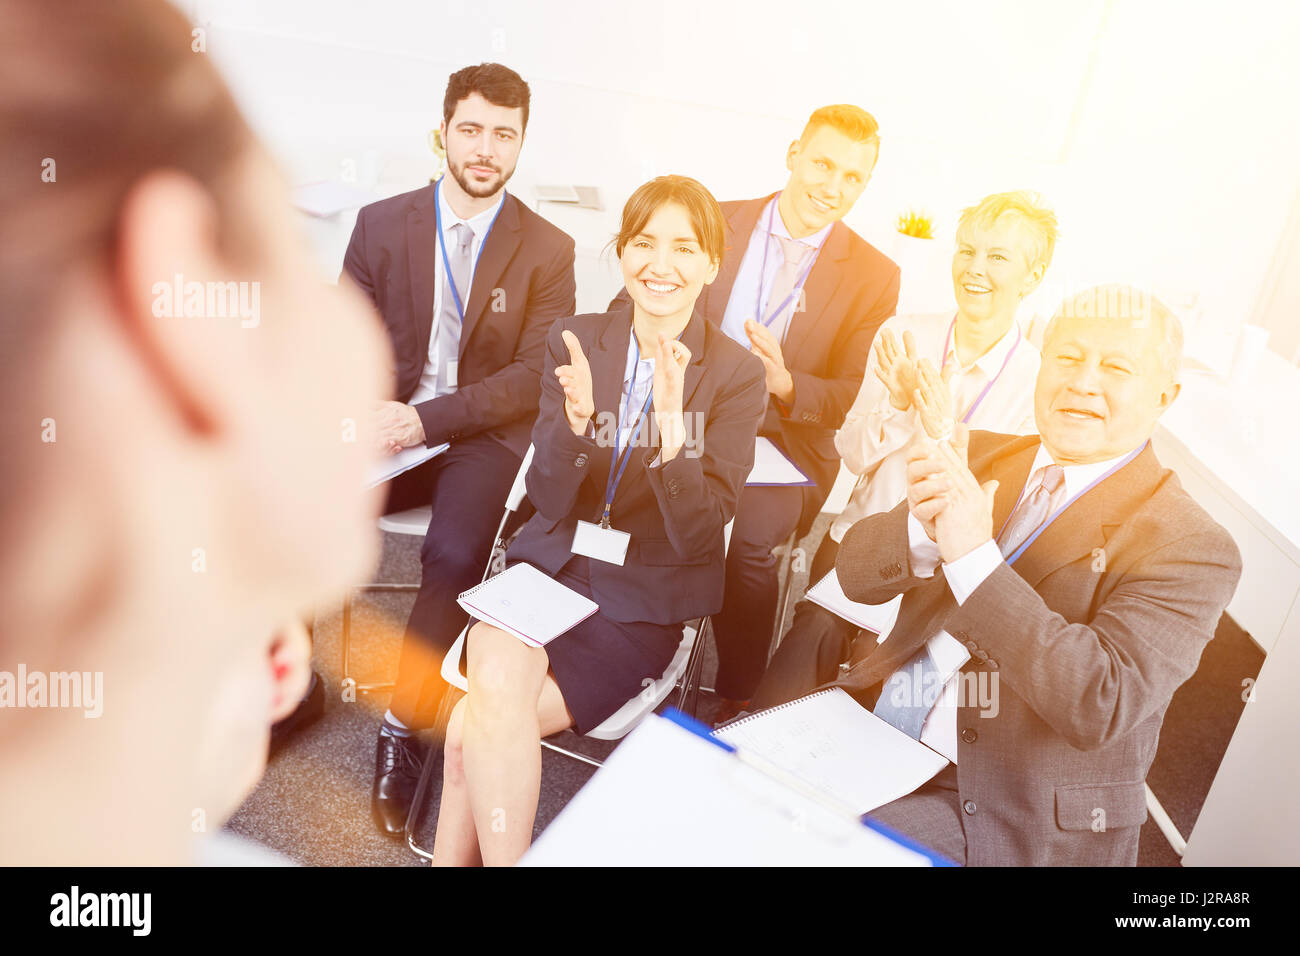 Business people as audience clap hands after business workshop Stock Photo